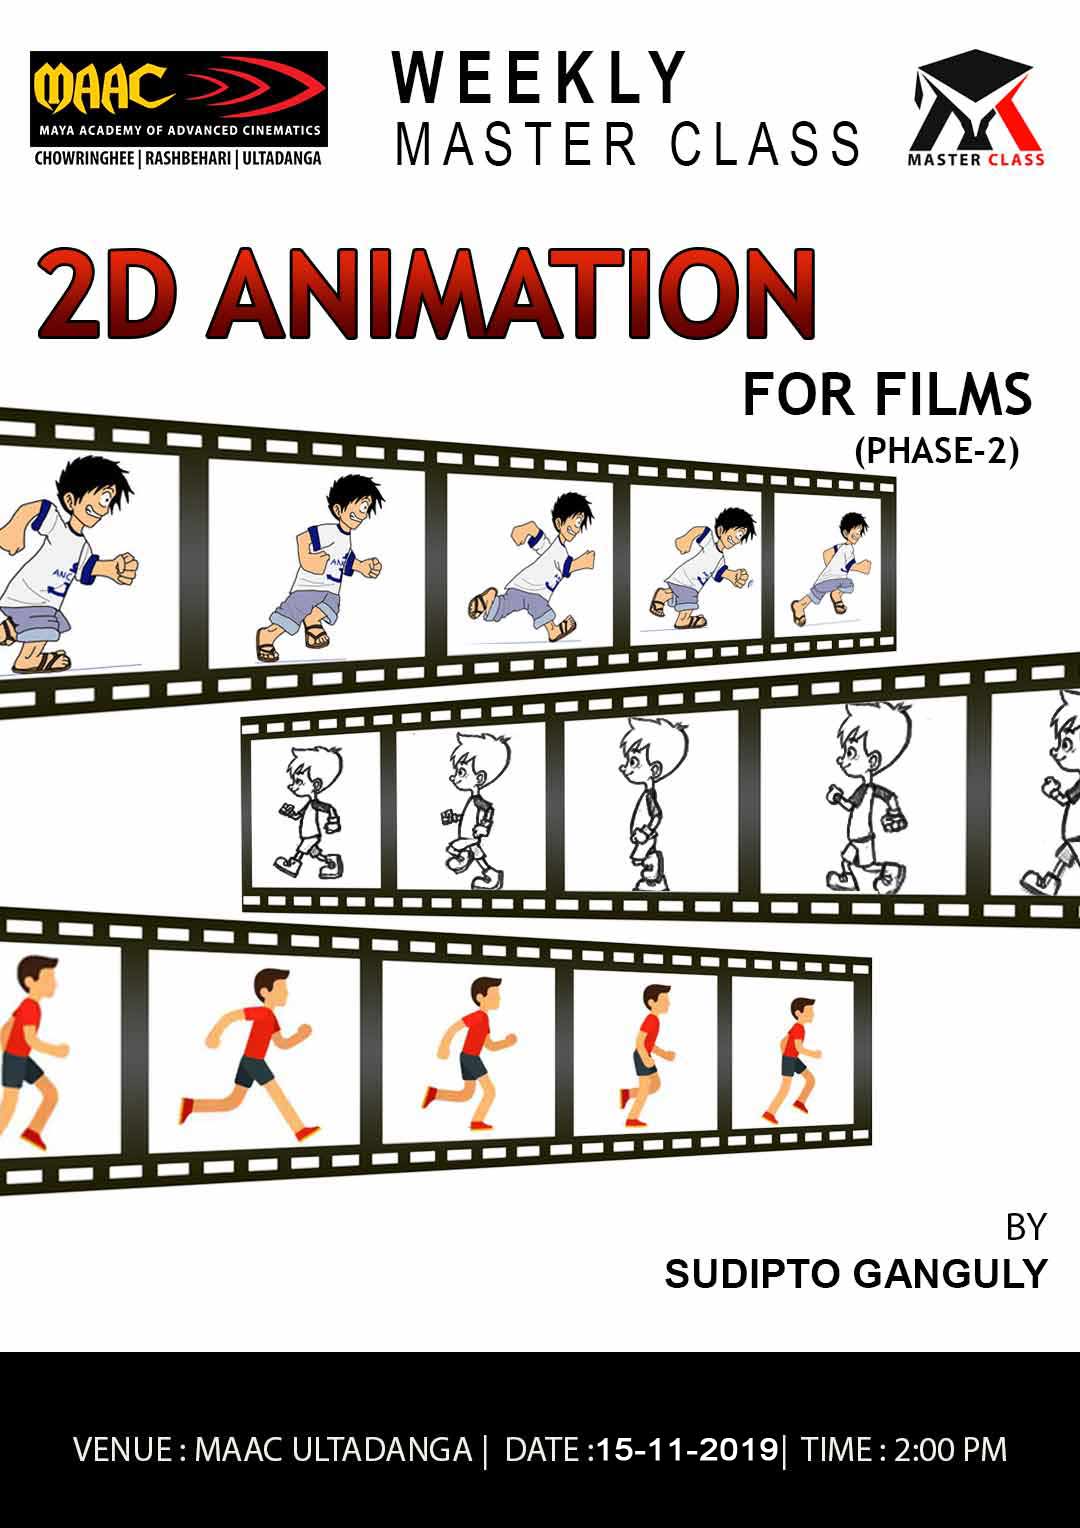 Weekly Master Class on 2D Animation